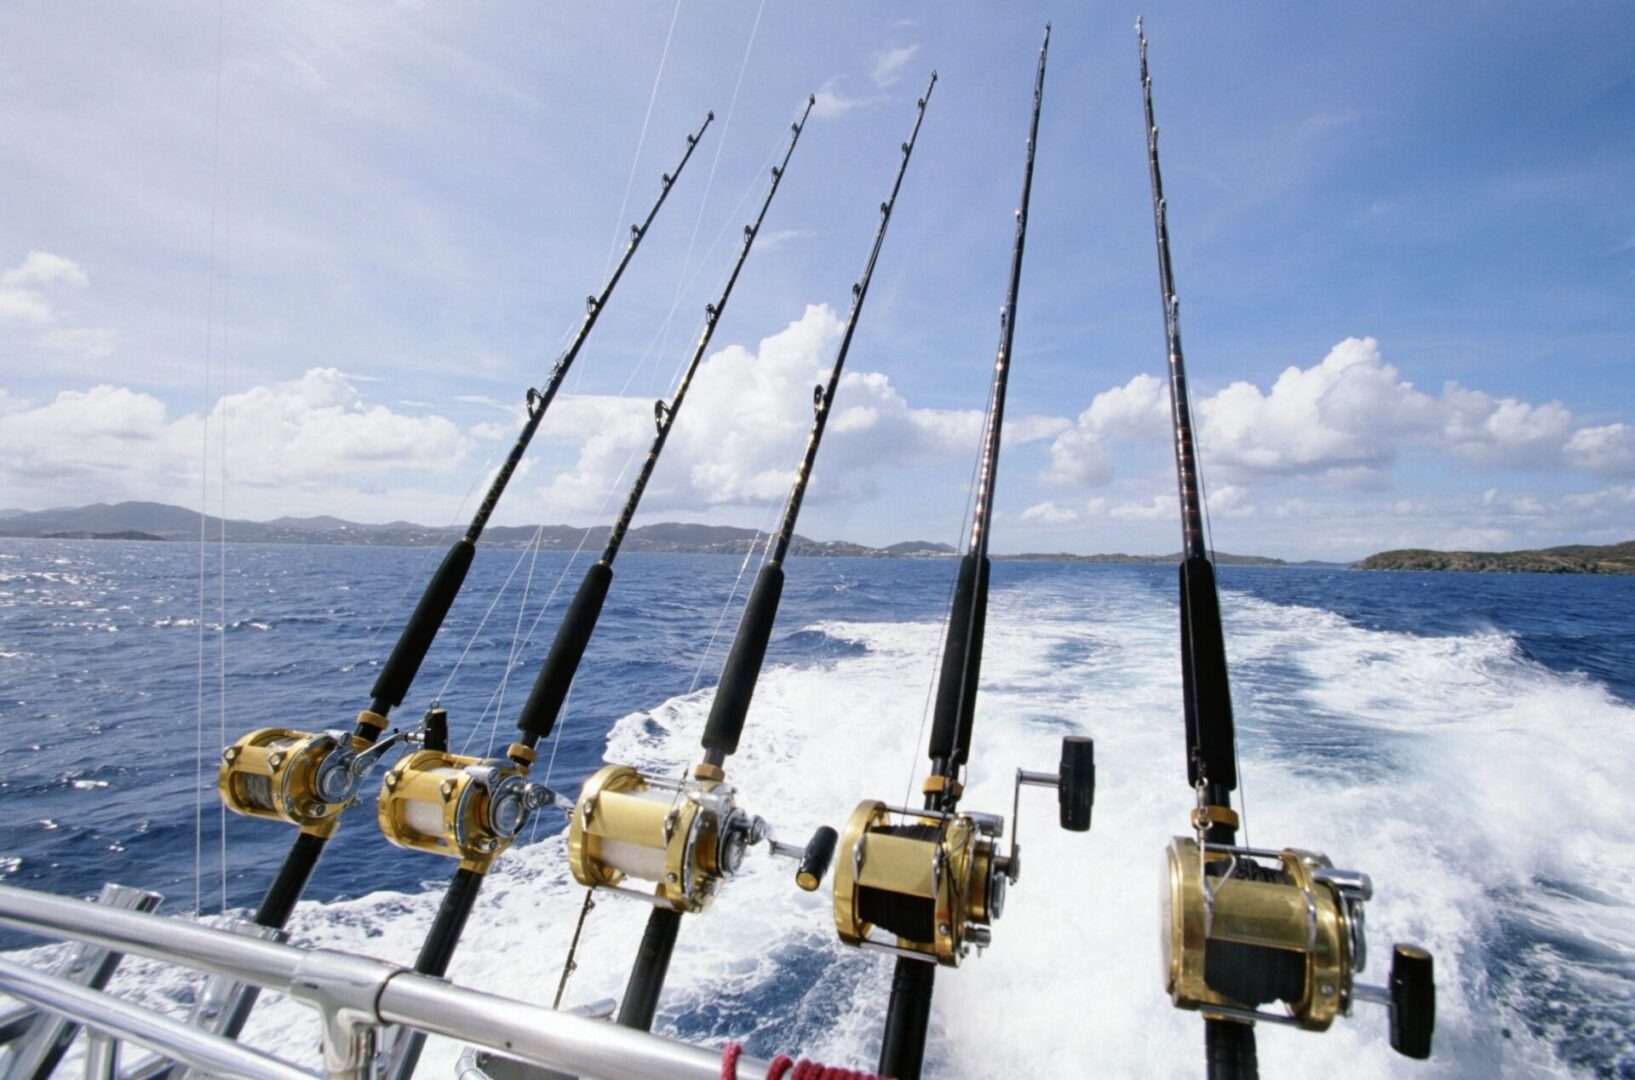 A group of fishing rods on the side of a boat.